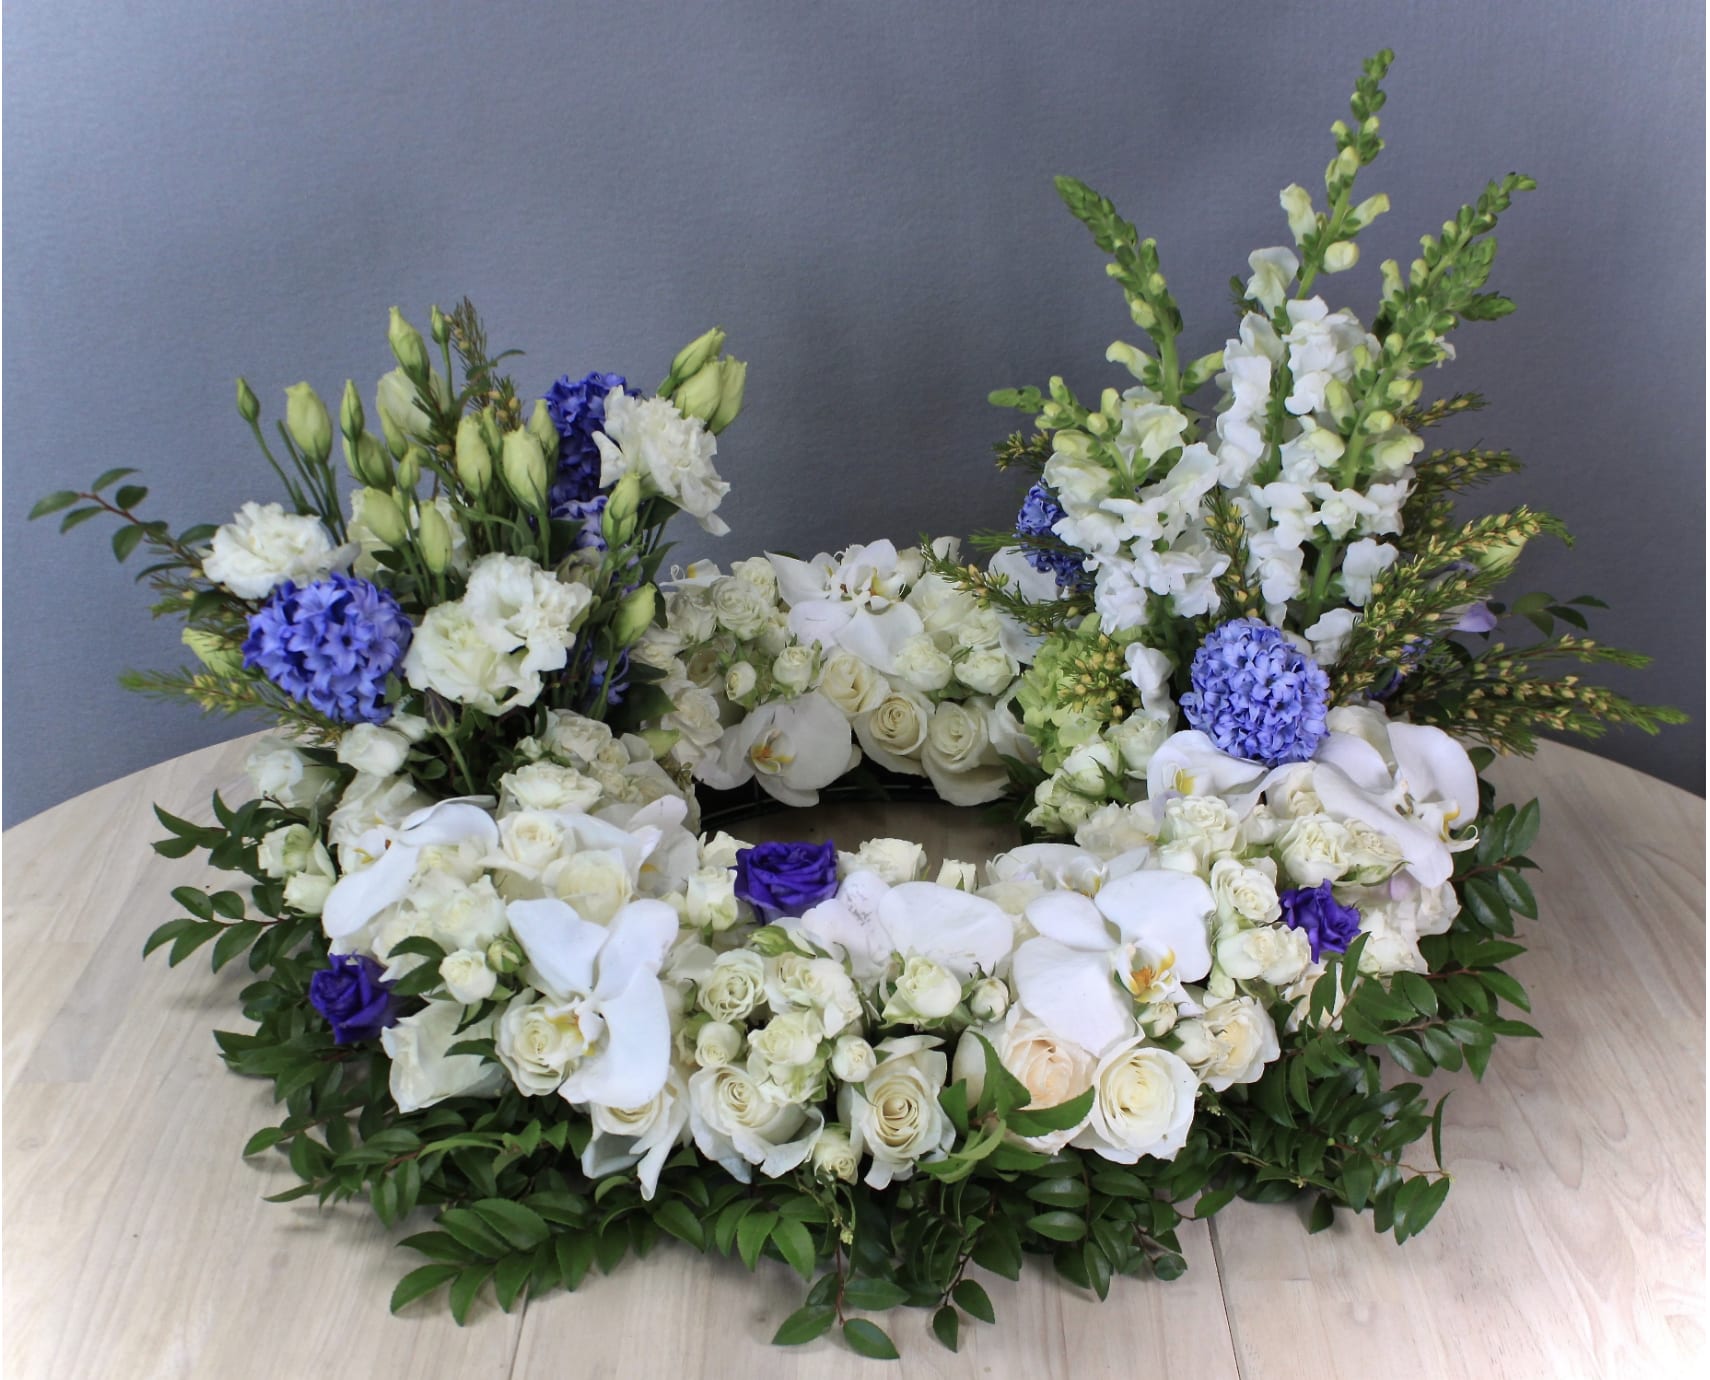 Urn Wreath in Blues  - This urn tribute wreath includes a mix of flowers, roses, and seasonal greens. In the special instruction let us know what colors you would like. Standard size is 30'', deluxe is 36'' and premium is 42''. Interior diameter is about 10'' for standard size.